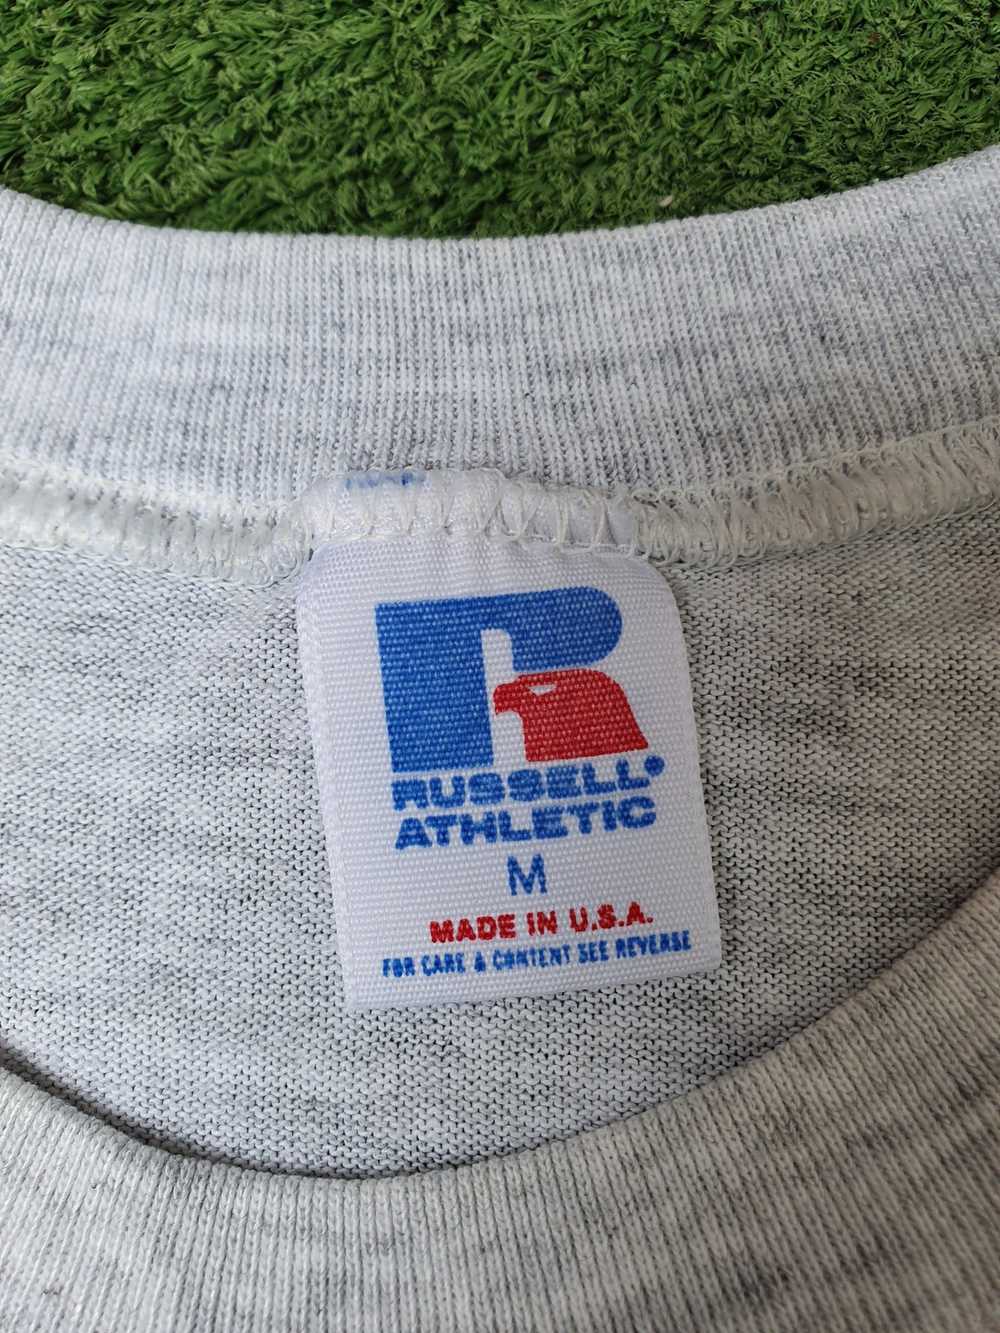 Russell Athletic Vtg Made in USA tee,sz M - image 4